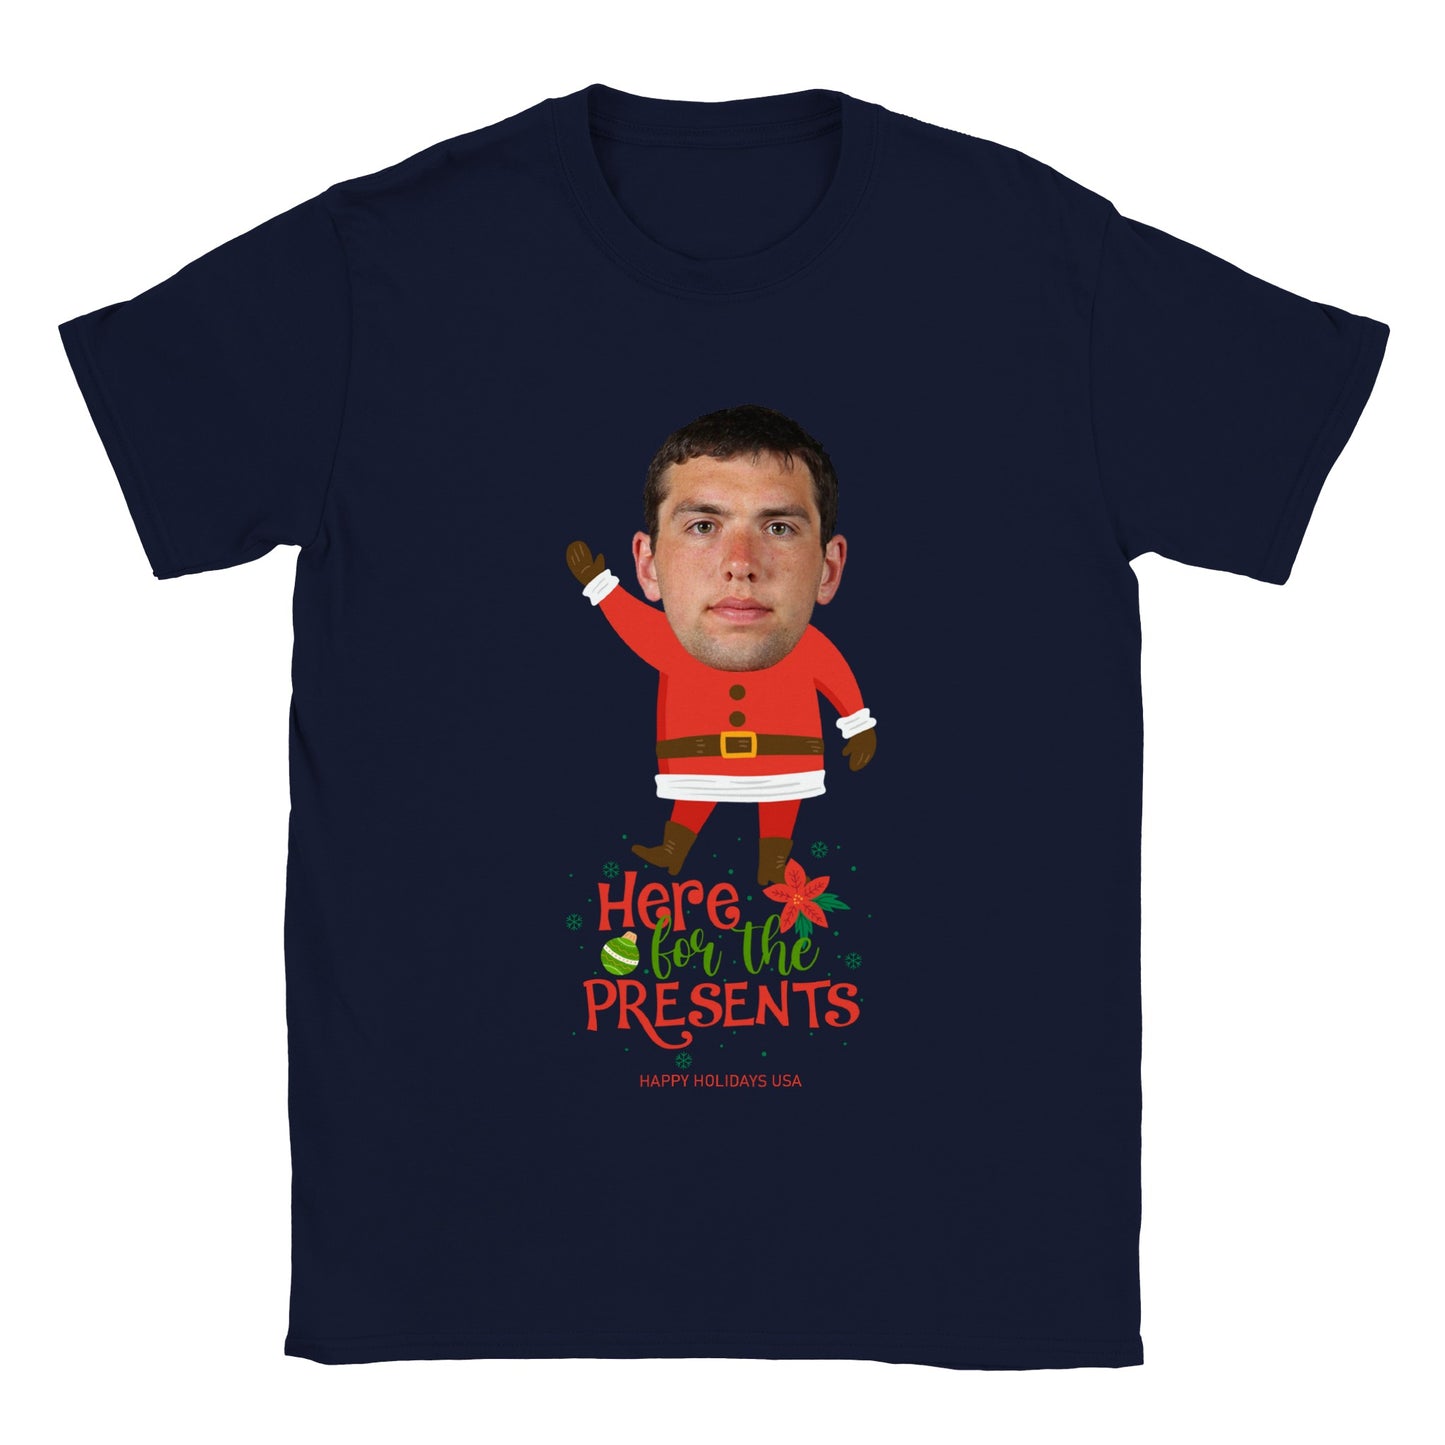 Here For The Presents - Christmas Tee